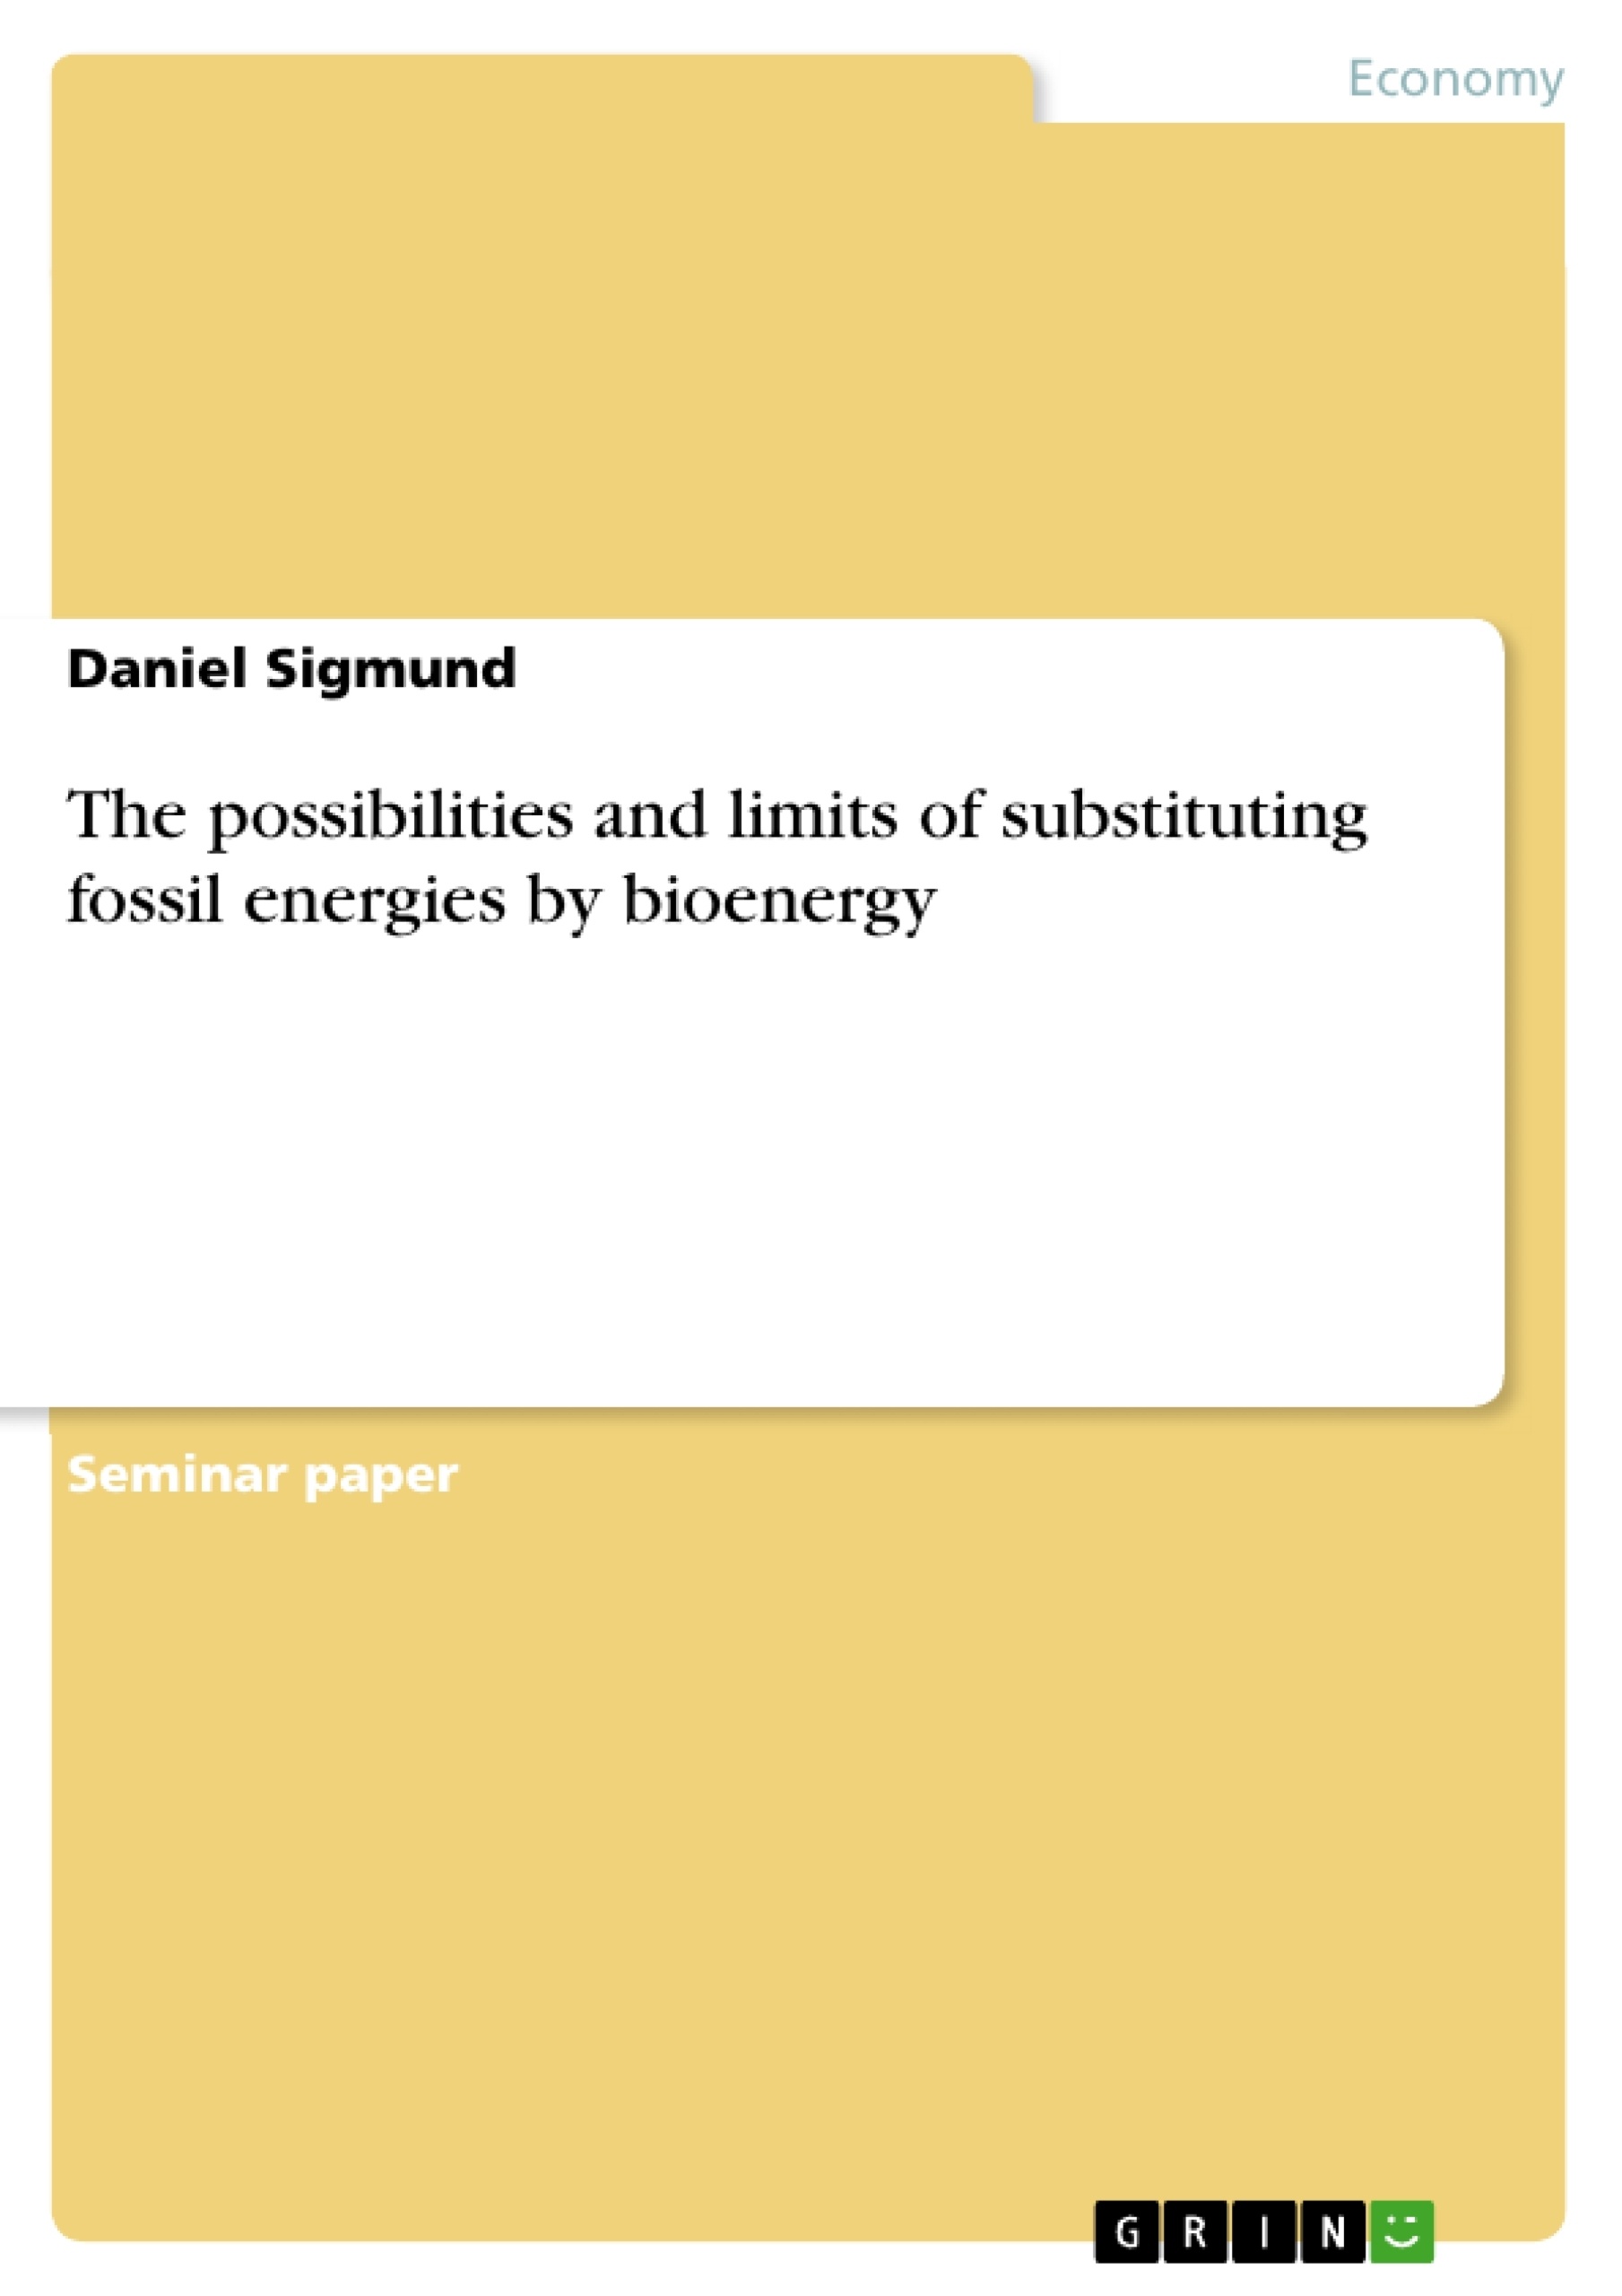 Título: The possibilities and limits of substituting fossil energies by bioenergy